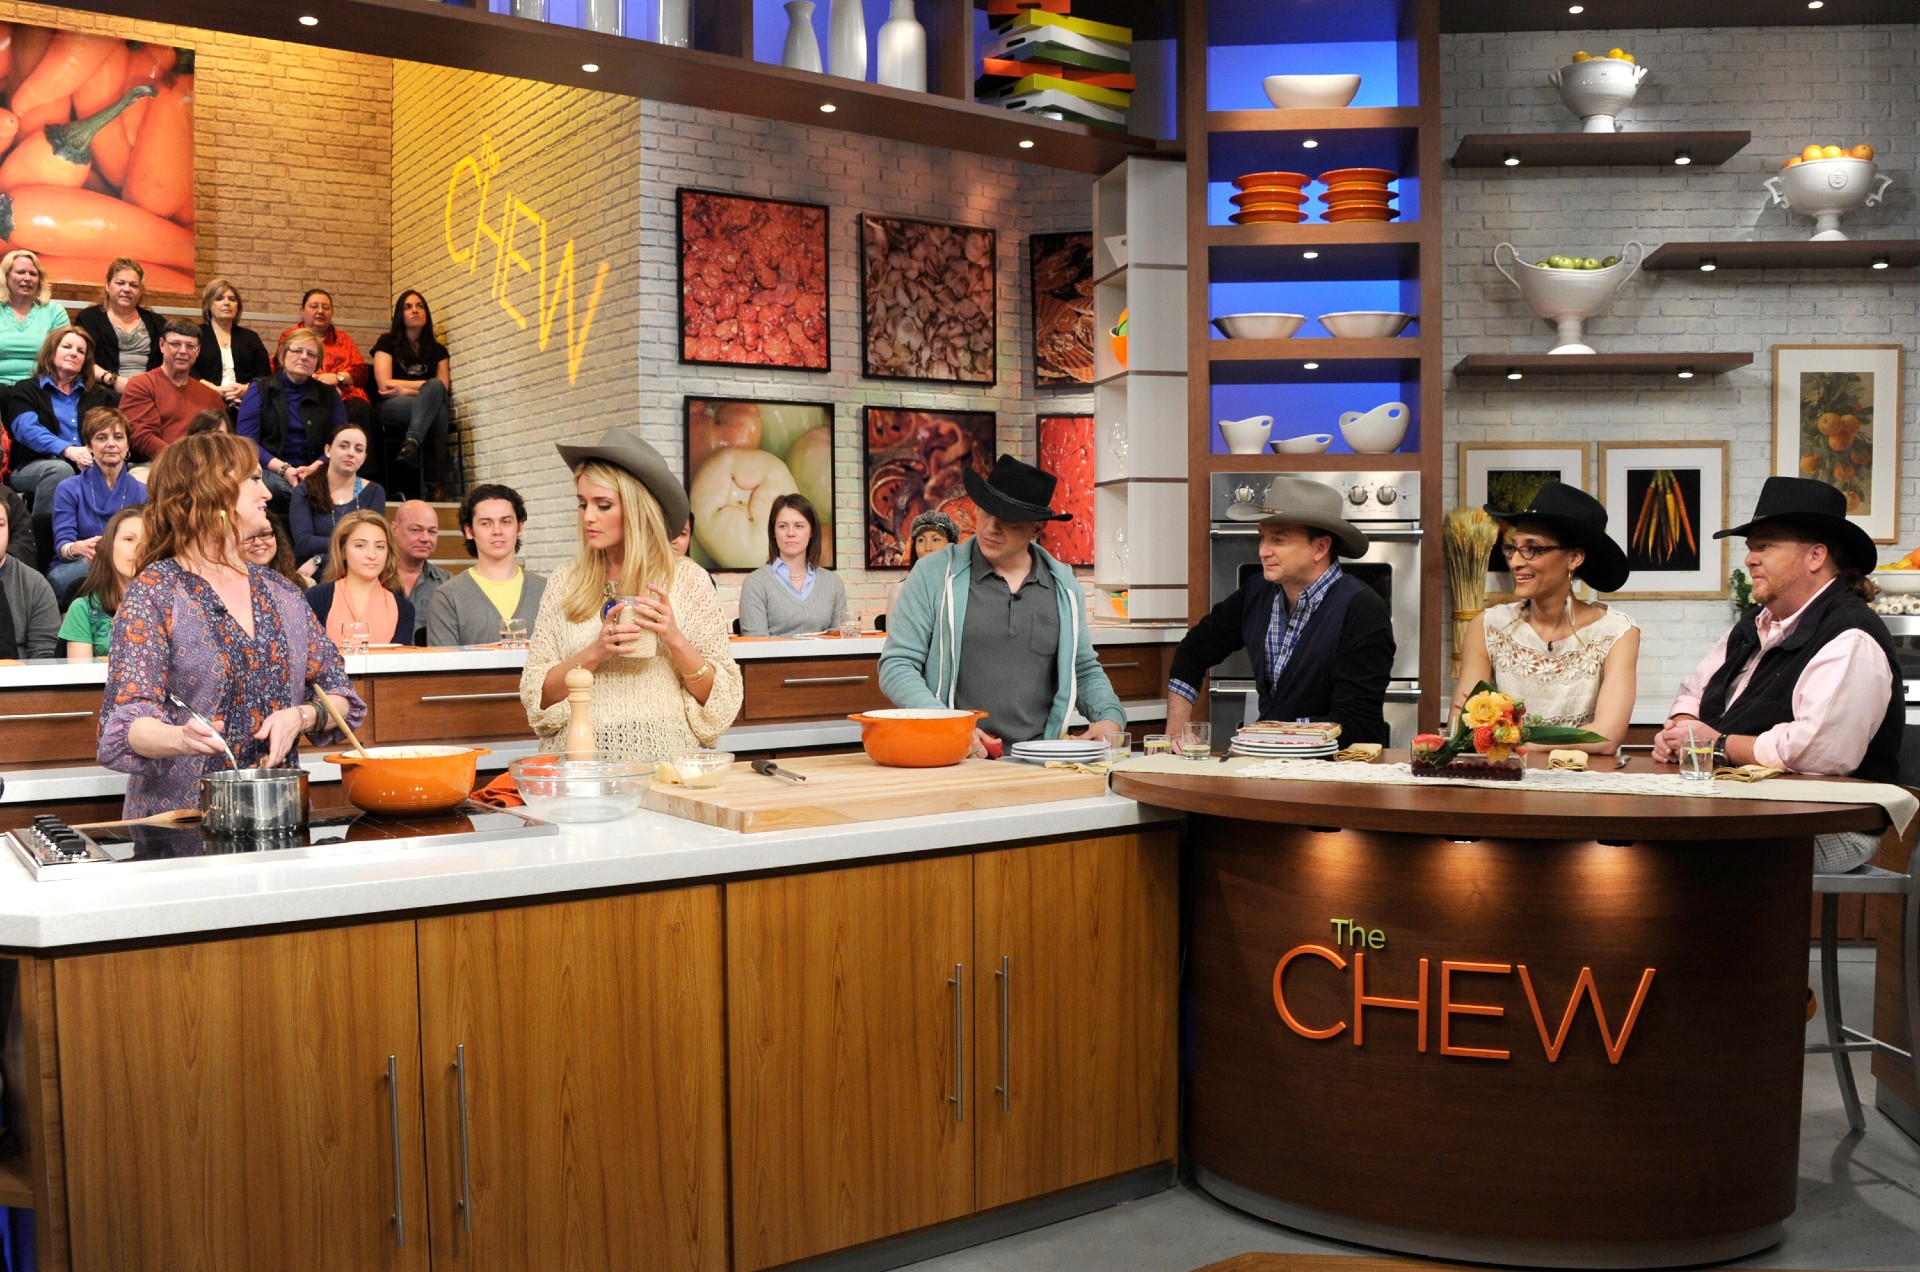 The Pioneer Woman Ree Drummond does a cooking demonstration on CBS' The Chew.